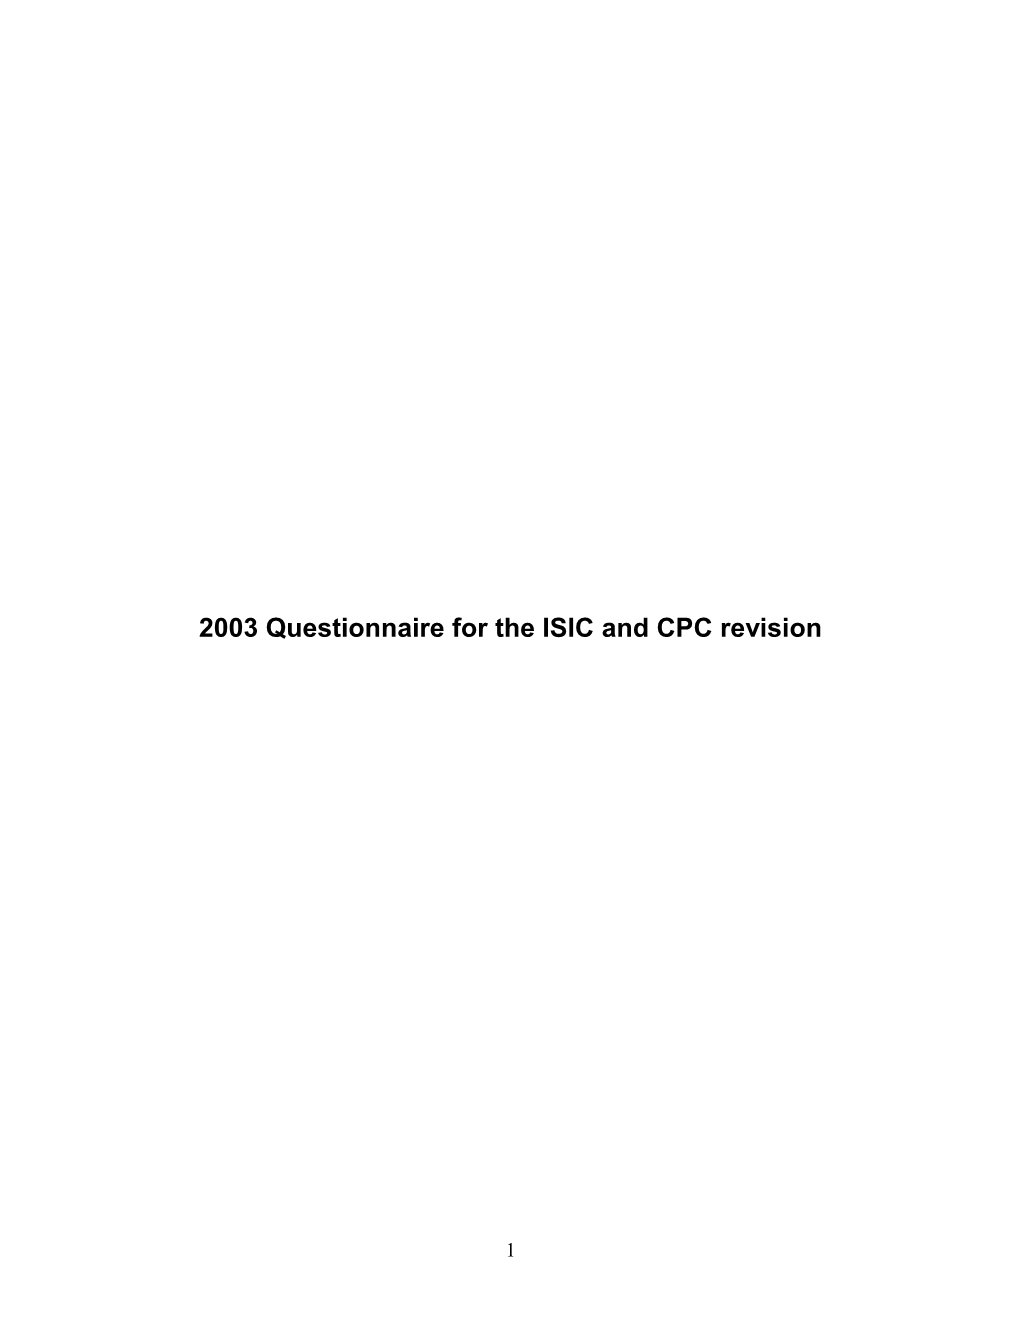 2003 Questionnaire for the ISIC and CPC Revision2003 Questionnaire for the ISIC and CPC Revision